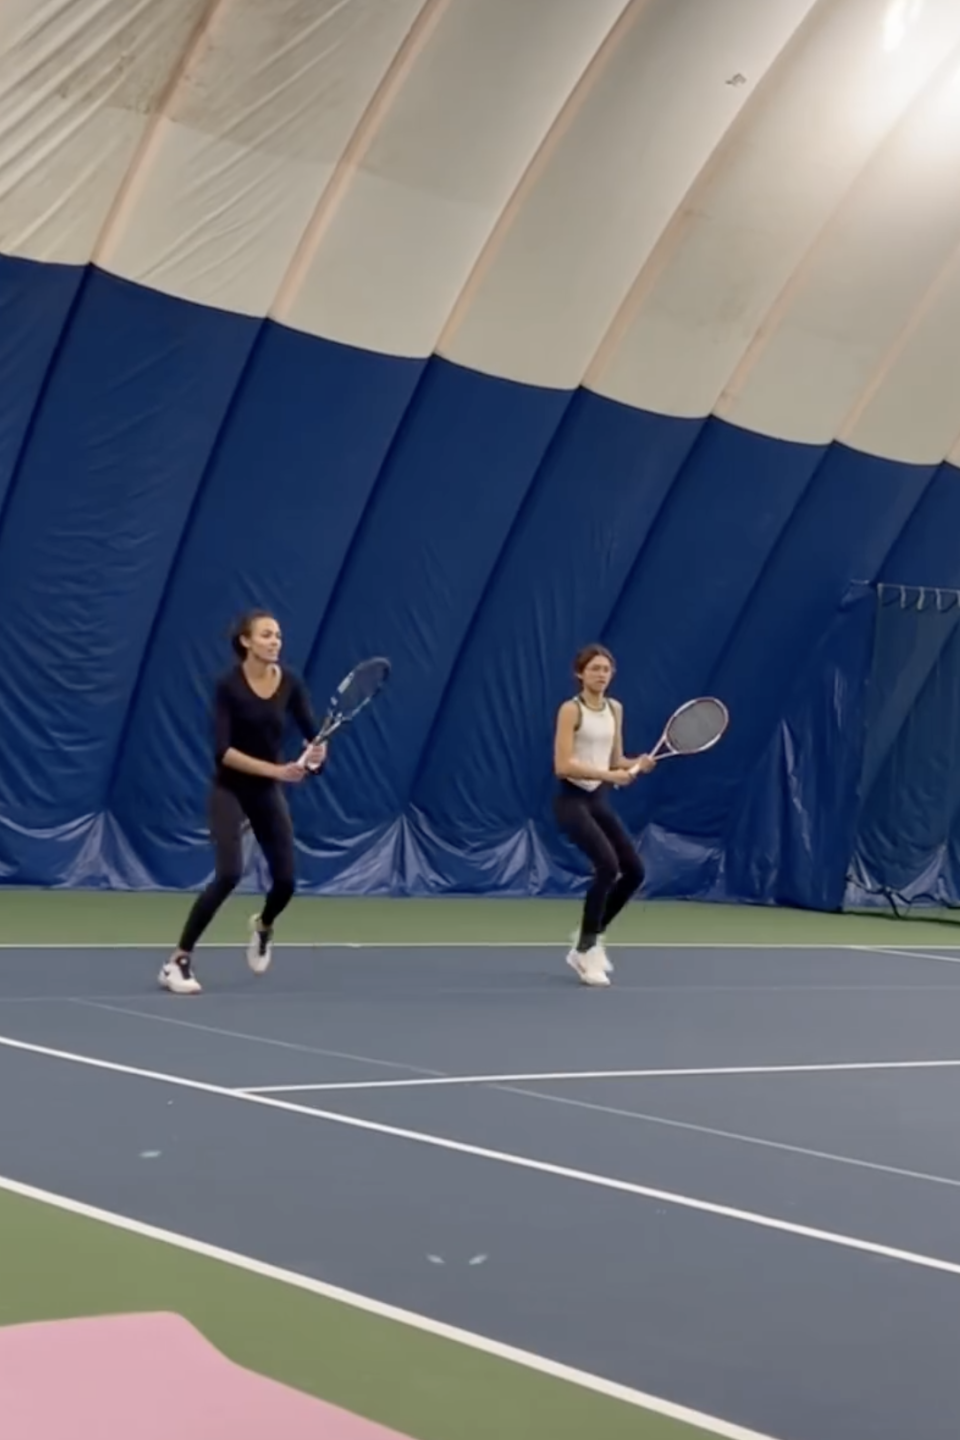 Two people playing tennis indoors